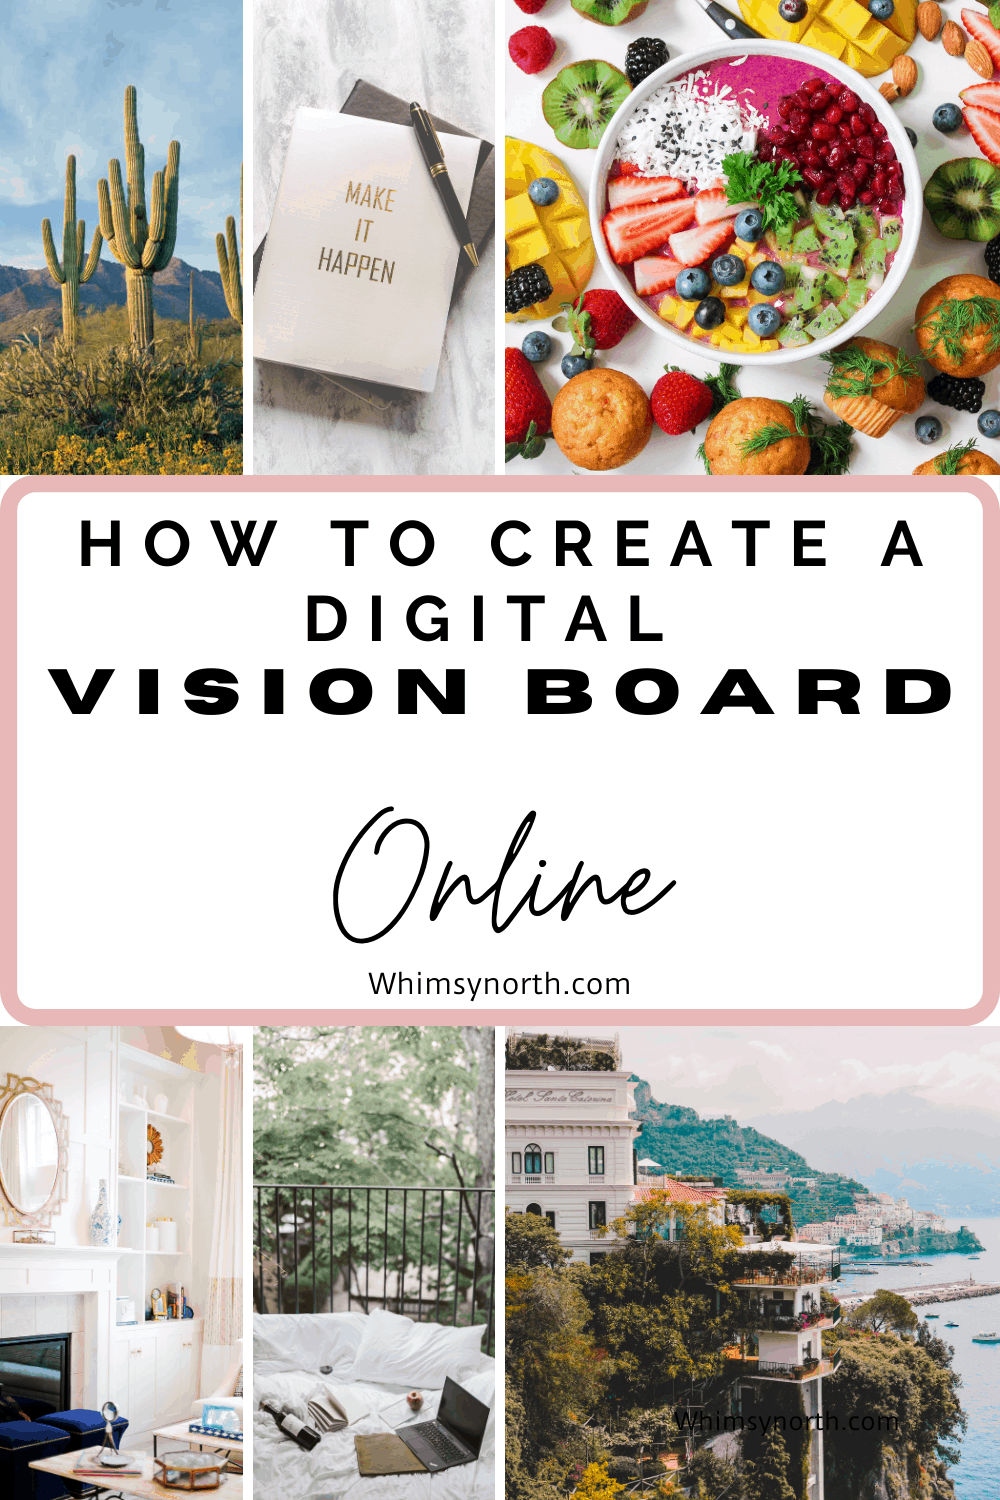 Vision Board Printables - 8 Pages of Free Inspirational Words and